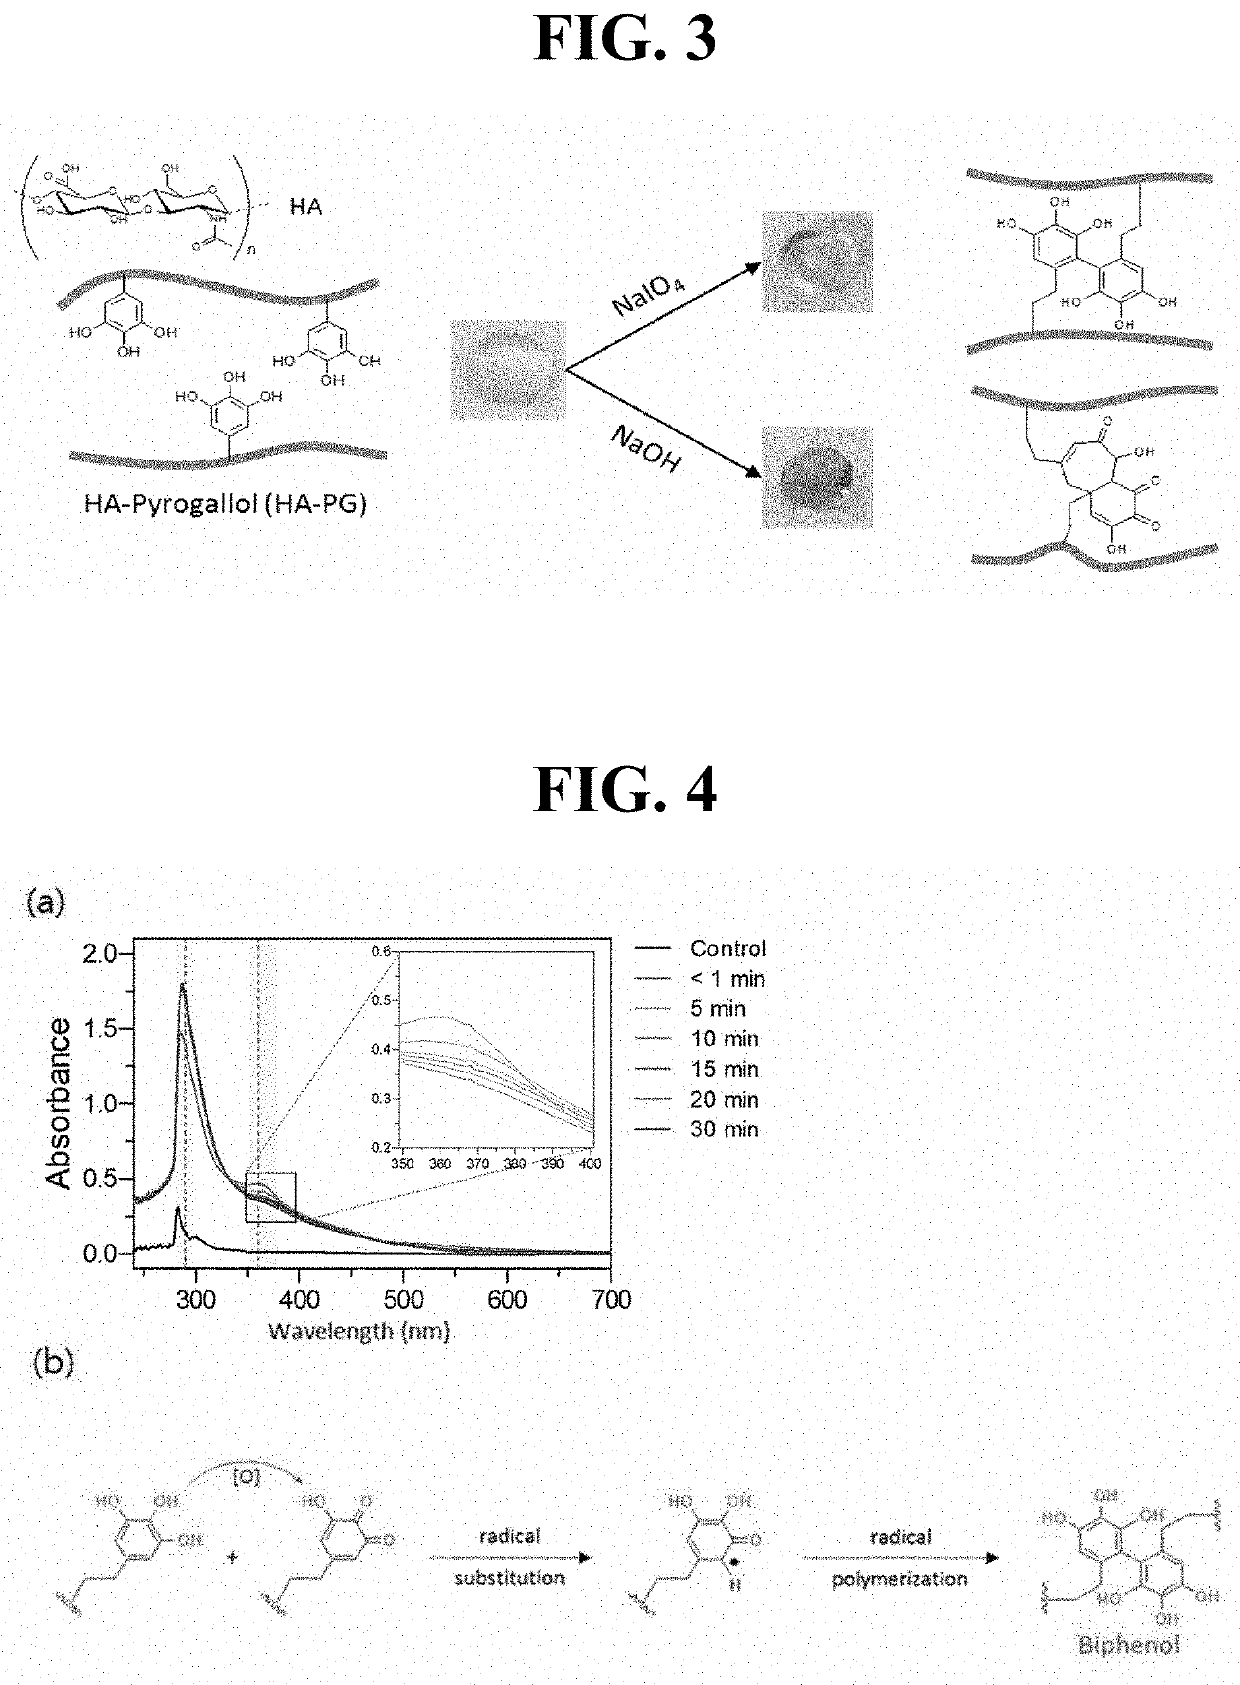 Hyaluronic acid derivative and use thereof